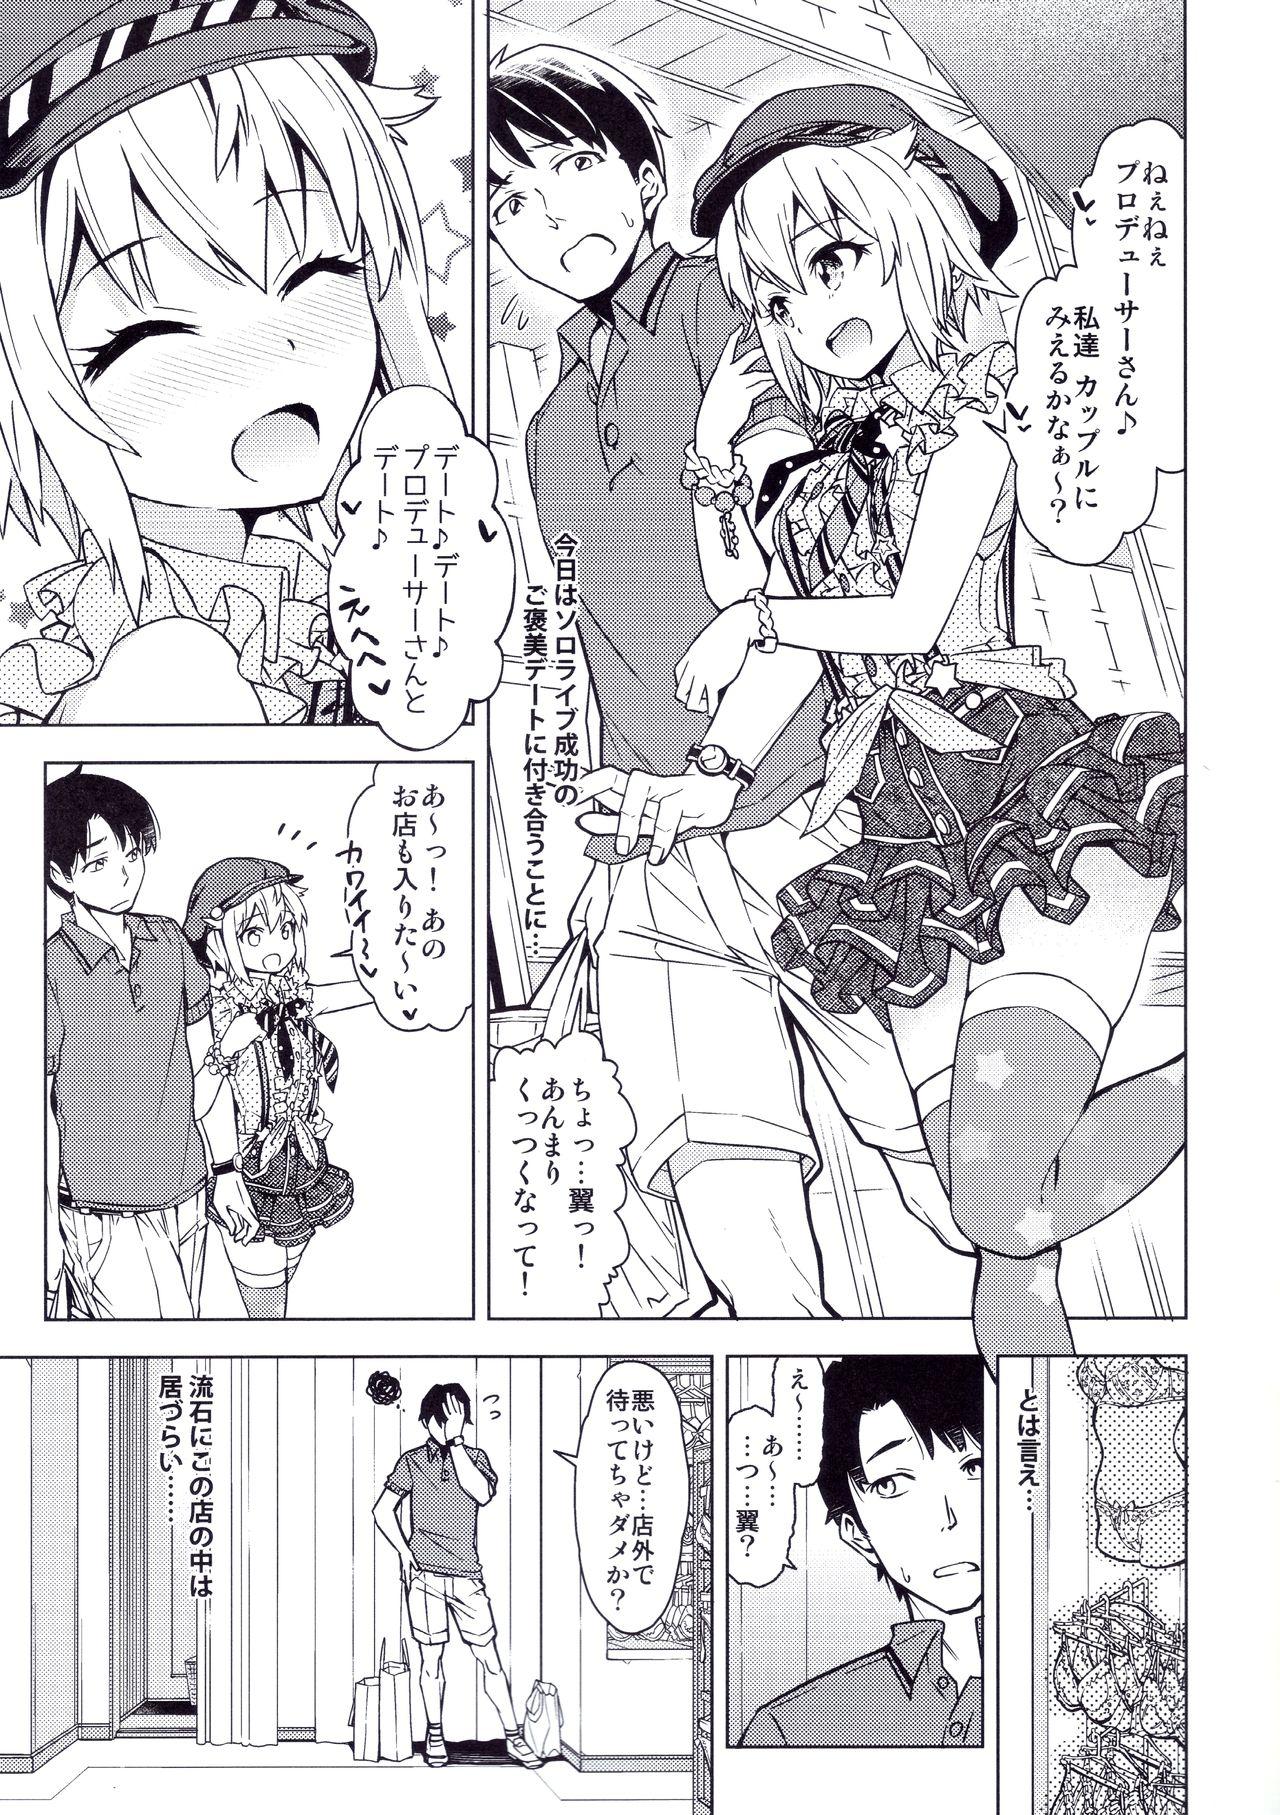 Leche ...Dame? - The idolmaster Babe - Page 2